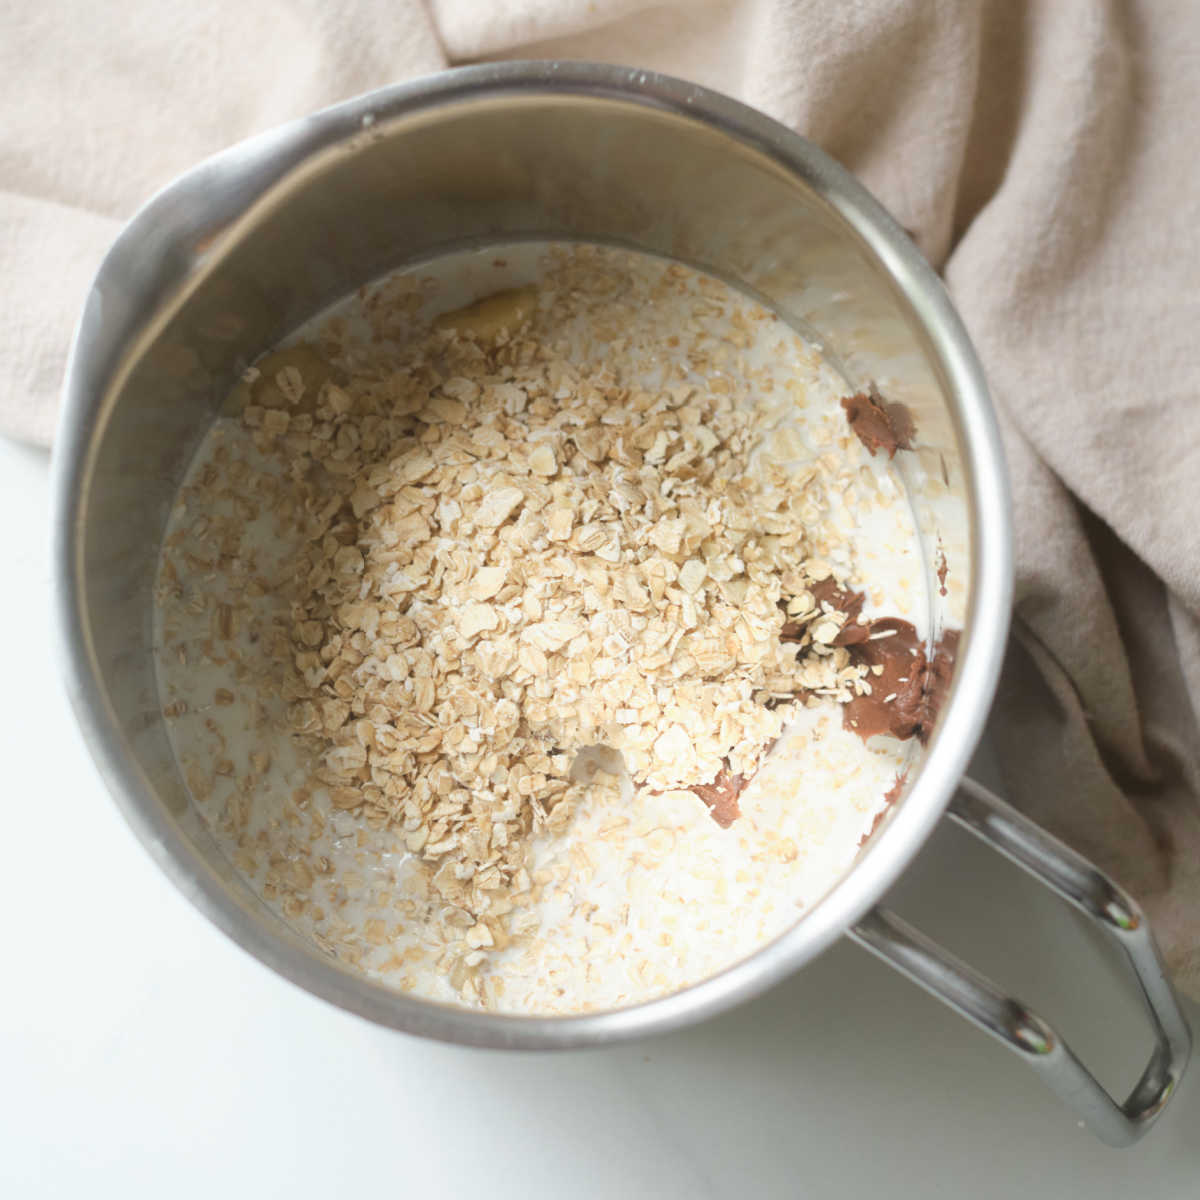 oats and other smoothie ingredients